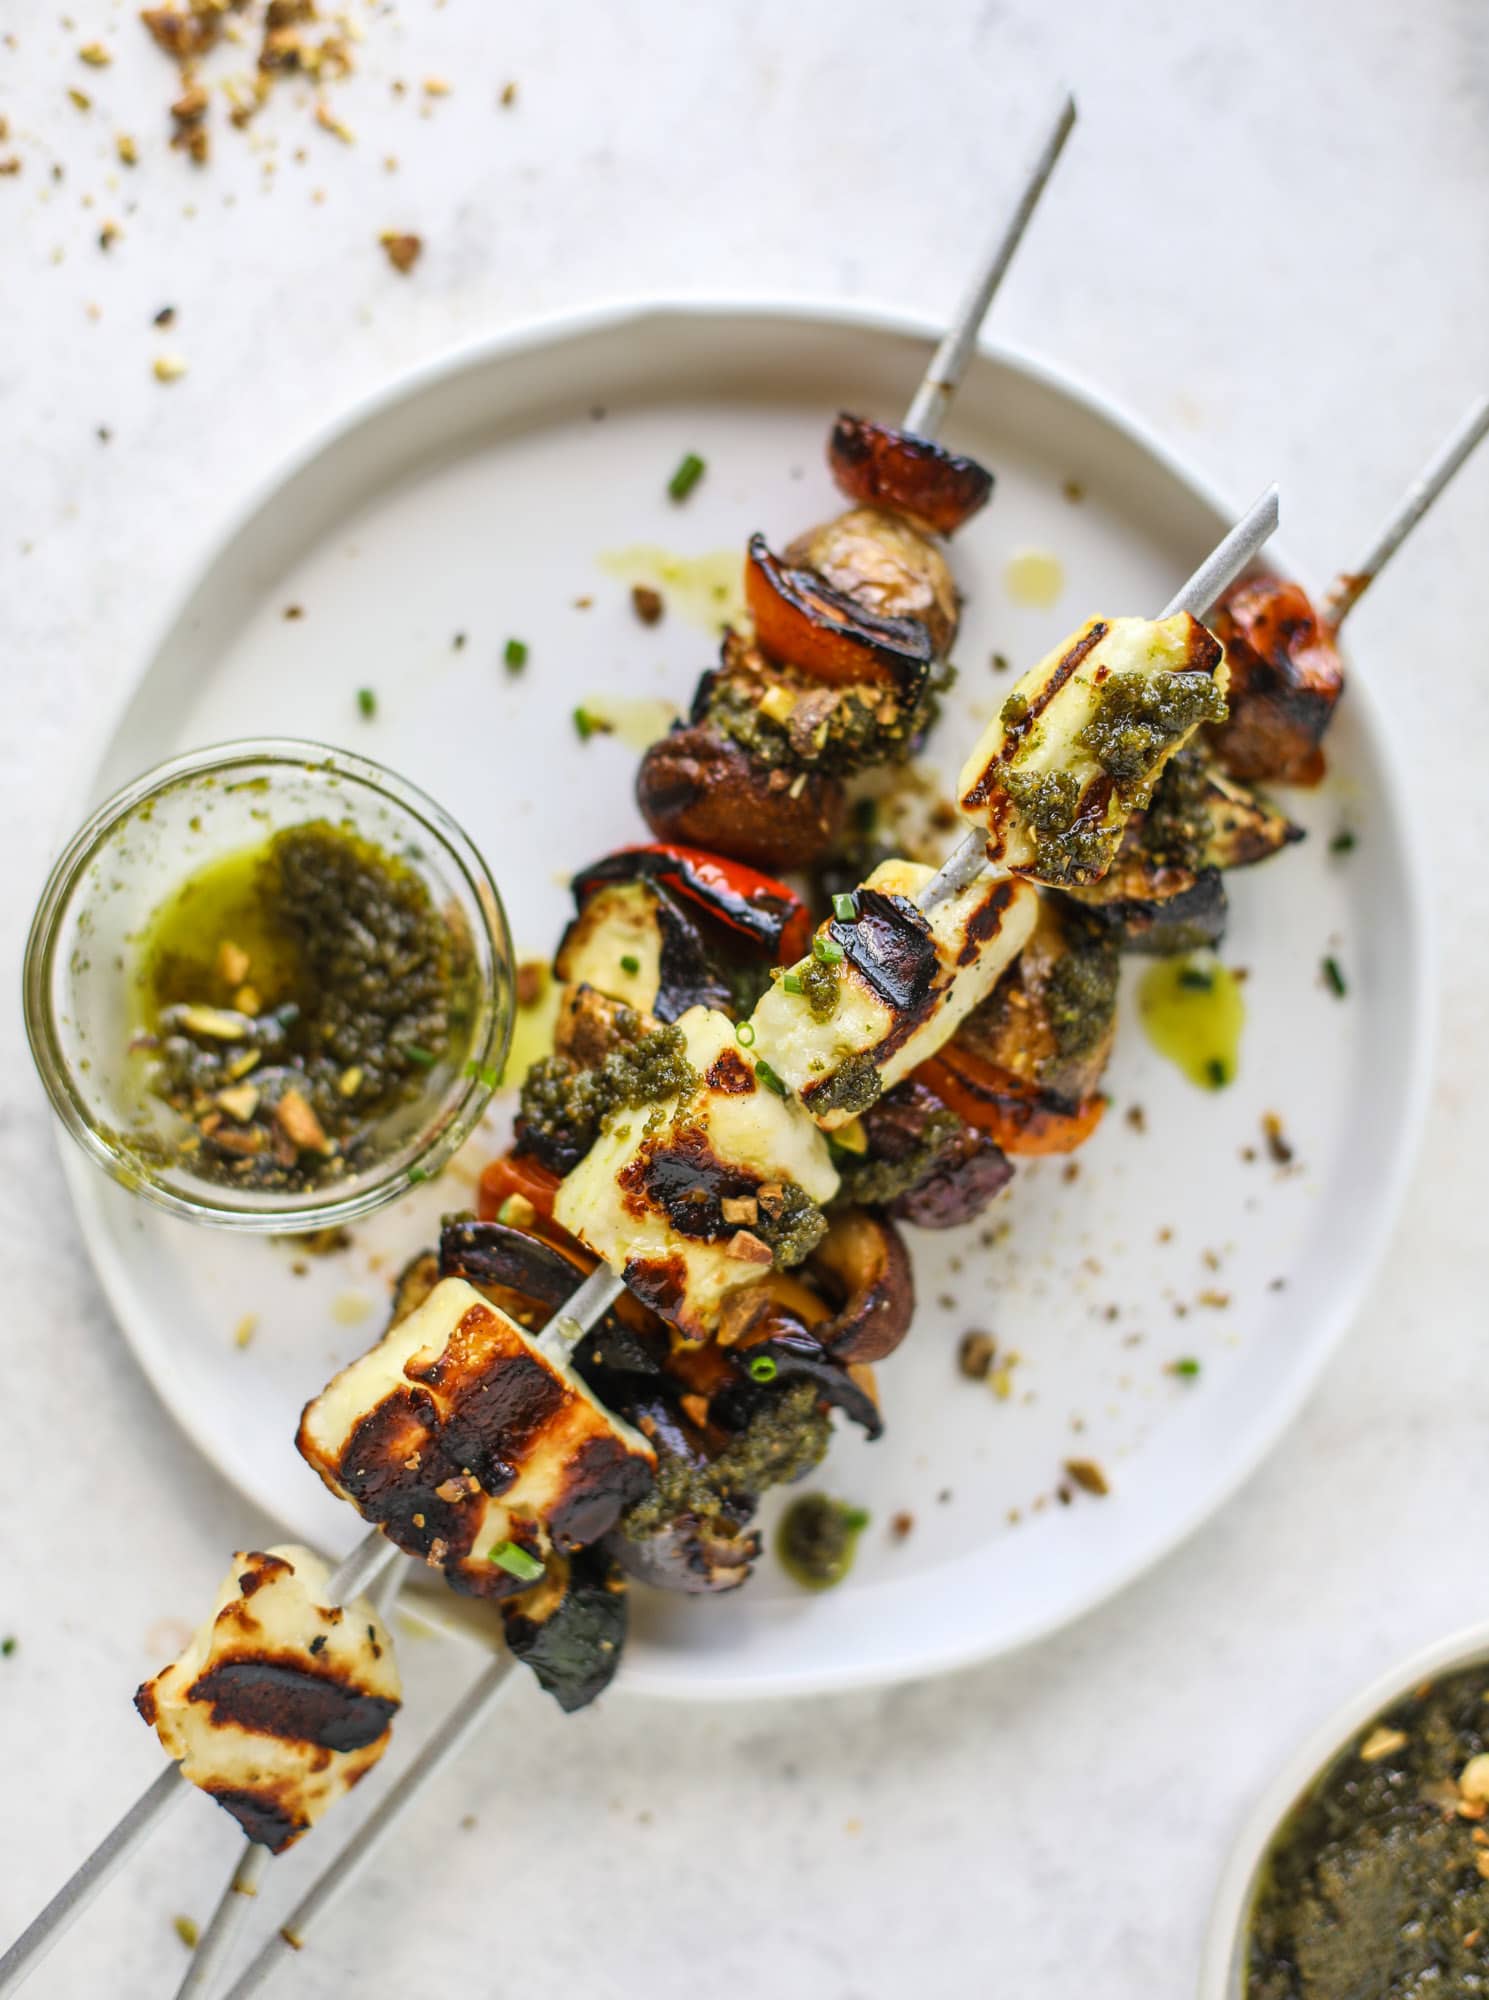 My all time favorite grilled vegetable skewers served with grilled halloumi cheese and pistachio pesto! Makes the best summer meal ever.